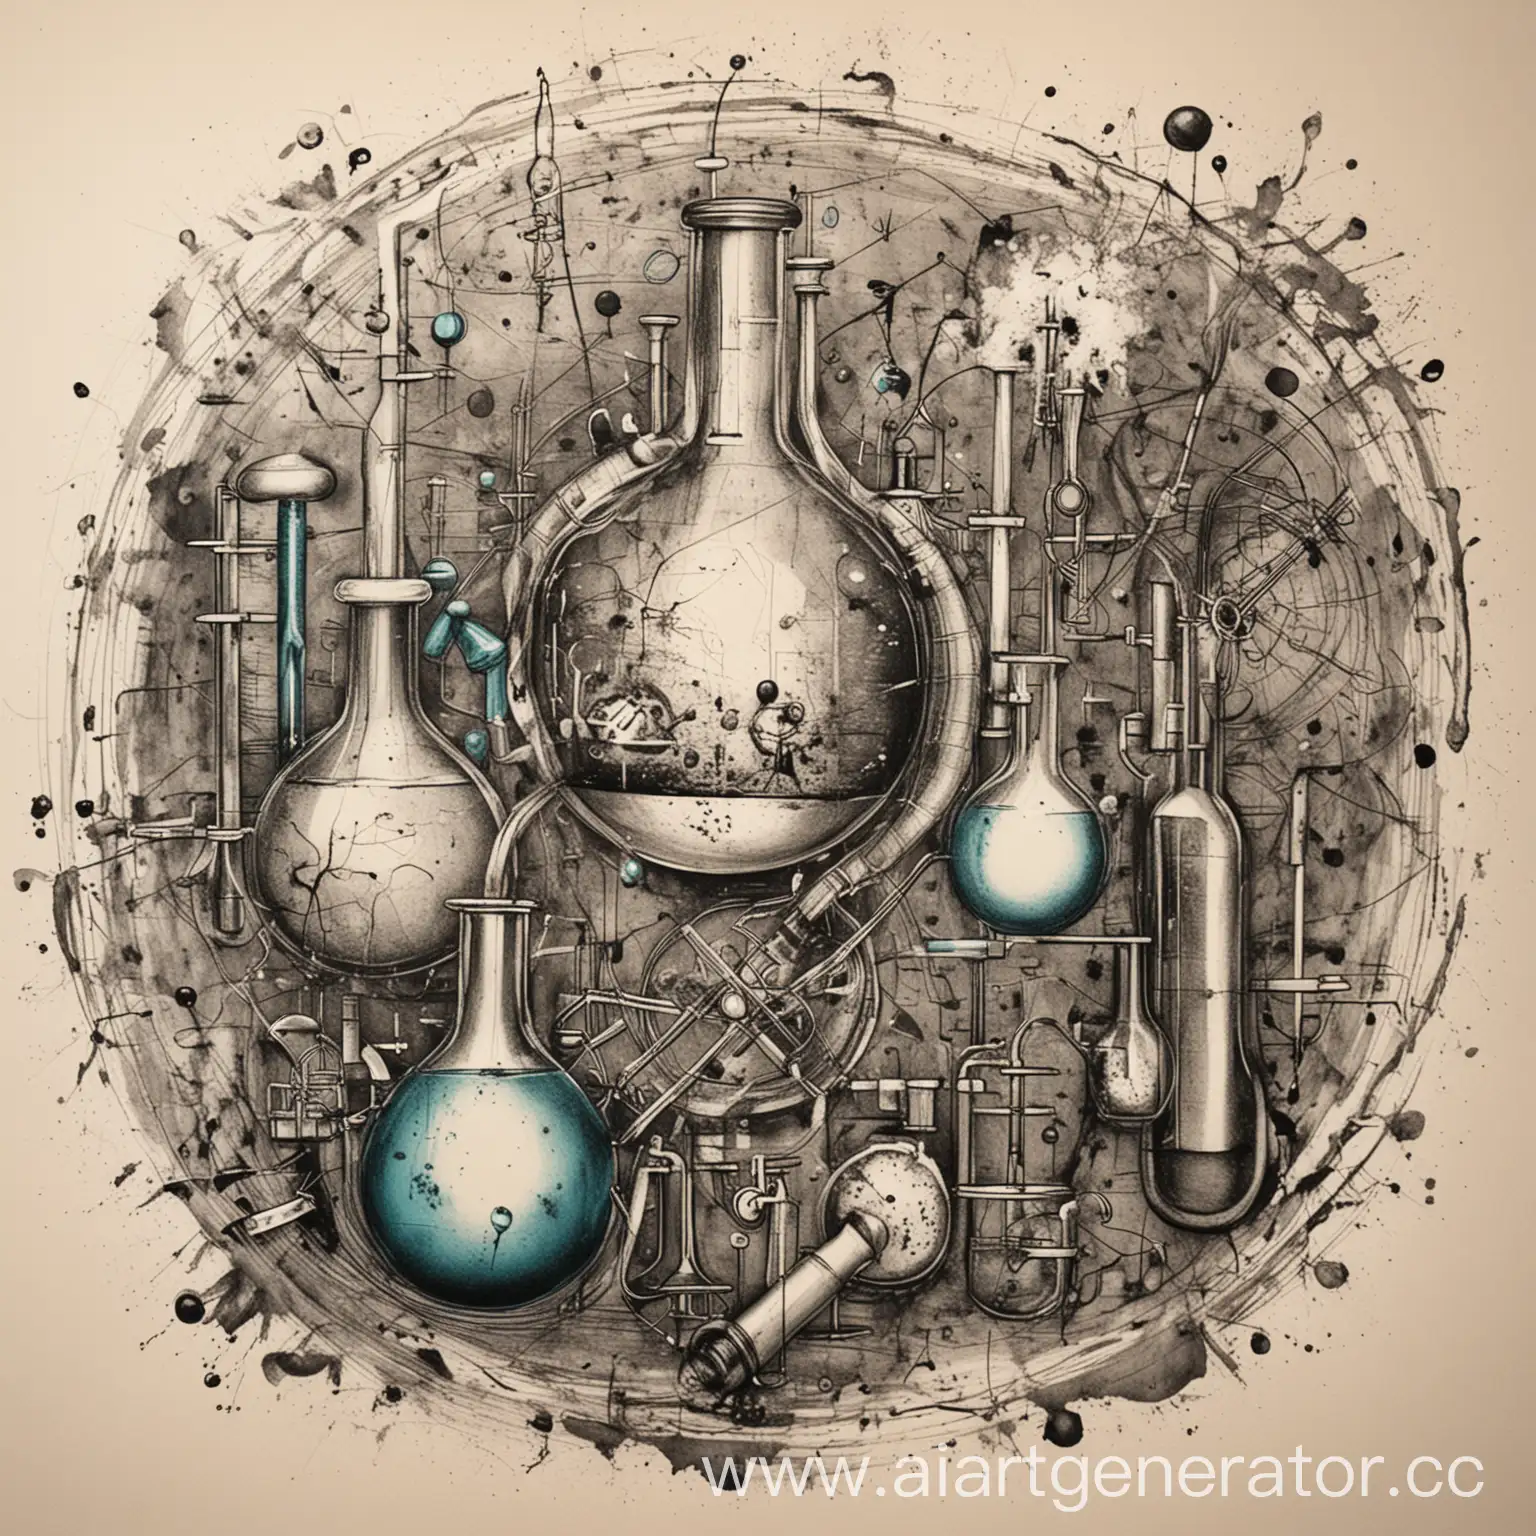 Abstract-ScientificChemical-Artwork-without-Chemical-Utensils